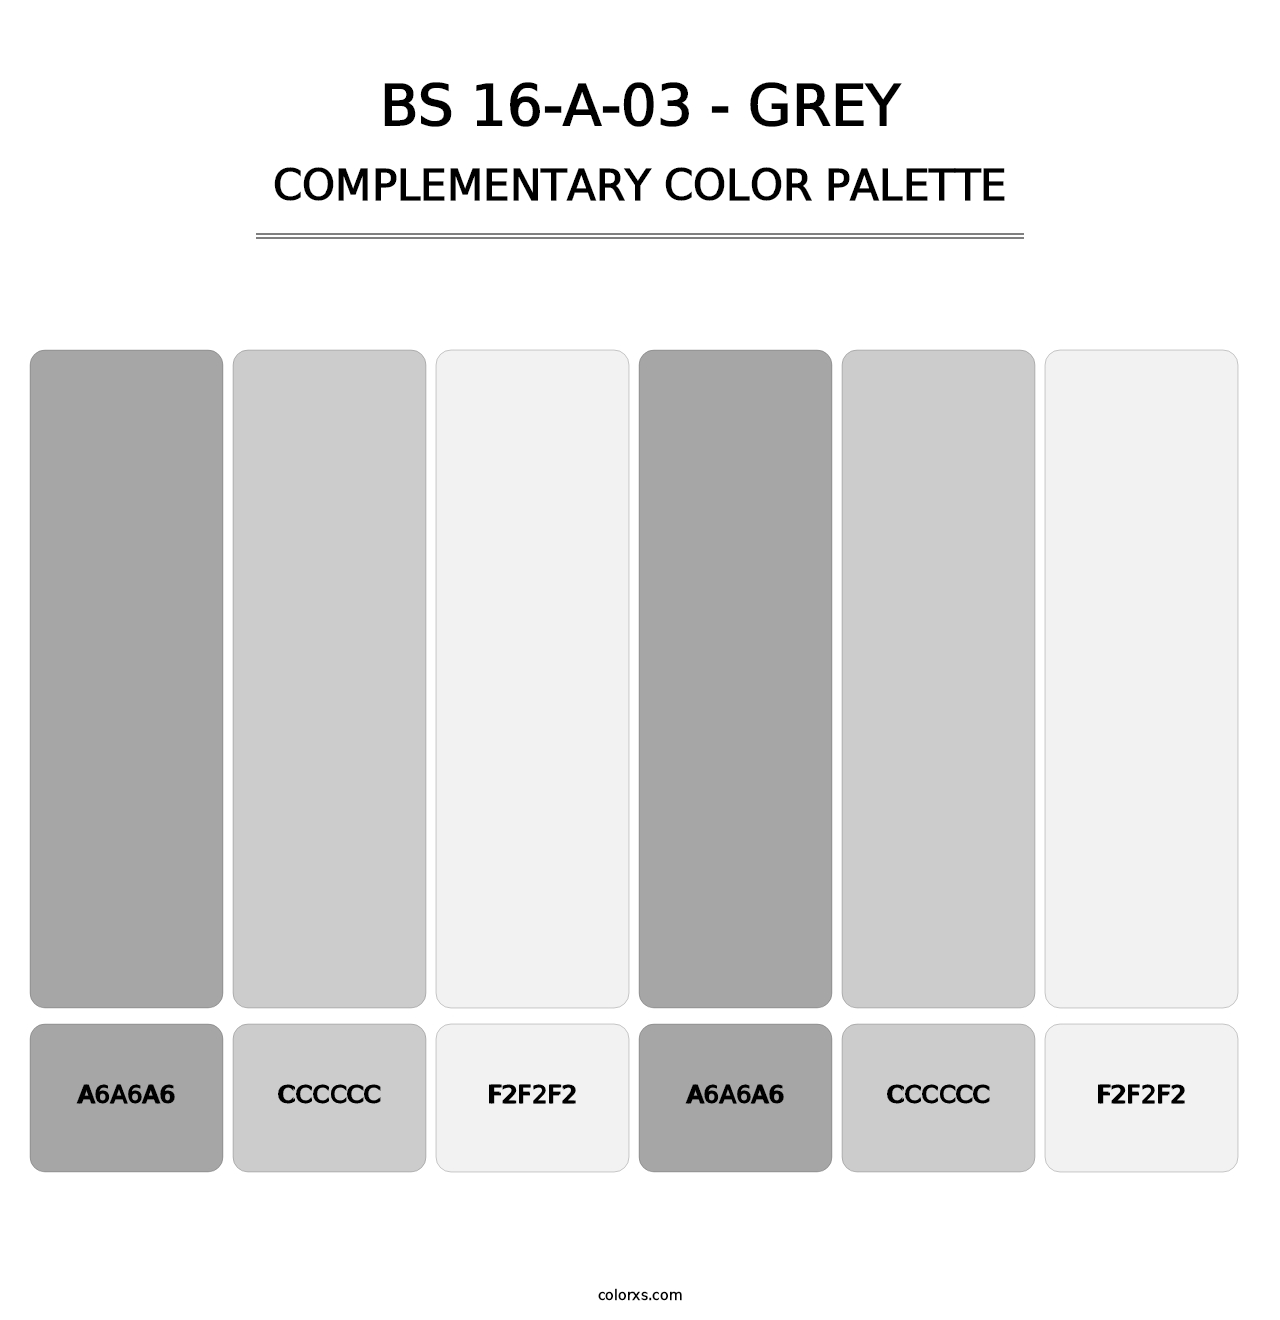 BS 16-A-03 - Grey - Complementary Color Palette